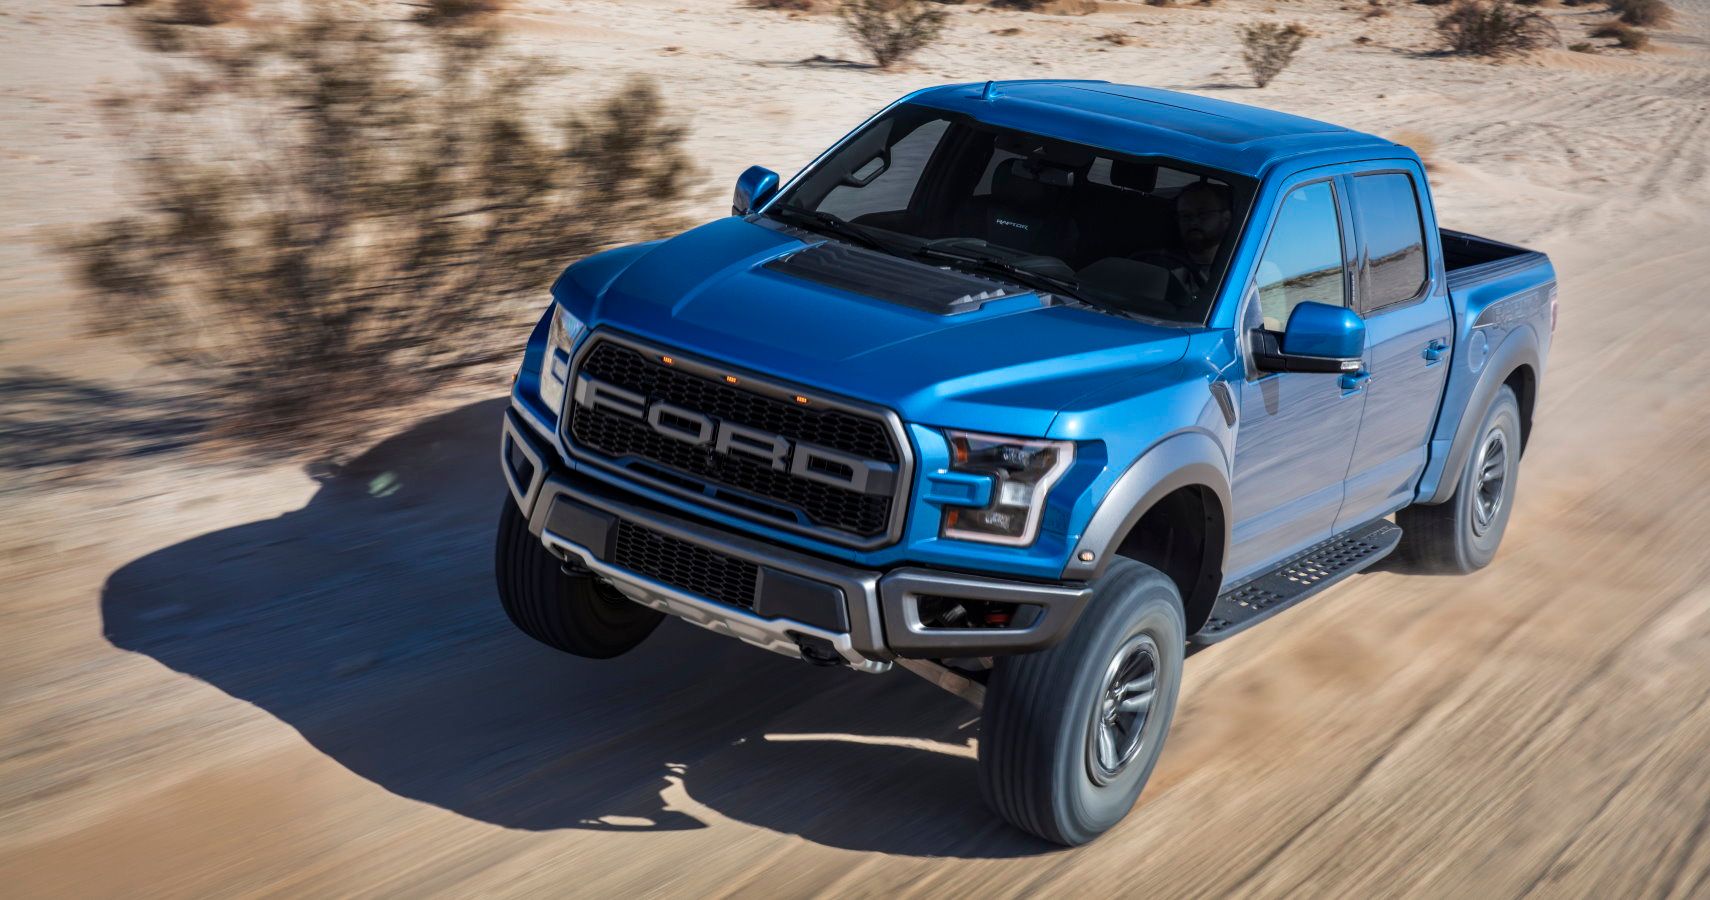 Ford is making its iconic F-150 Raptor ??? the ultimate high-performance off-road pickup ??? even better with upgraded technology including class-exclusive, electronically controlled FOX Racing Shox, new Trail Control??? and all-new Recaro sport seats.